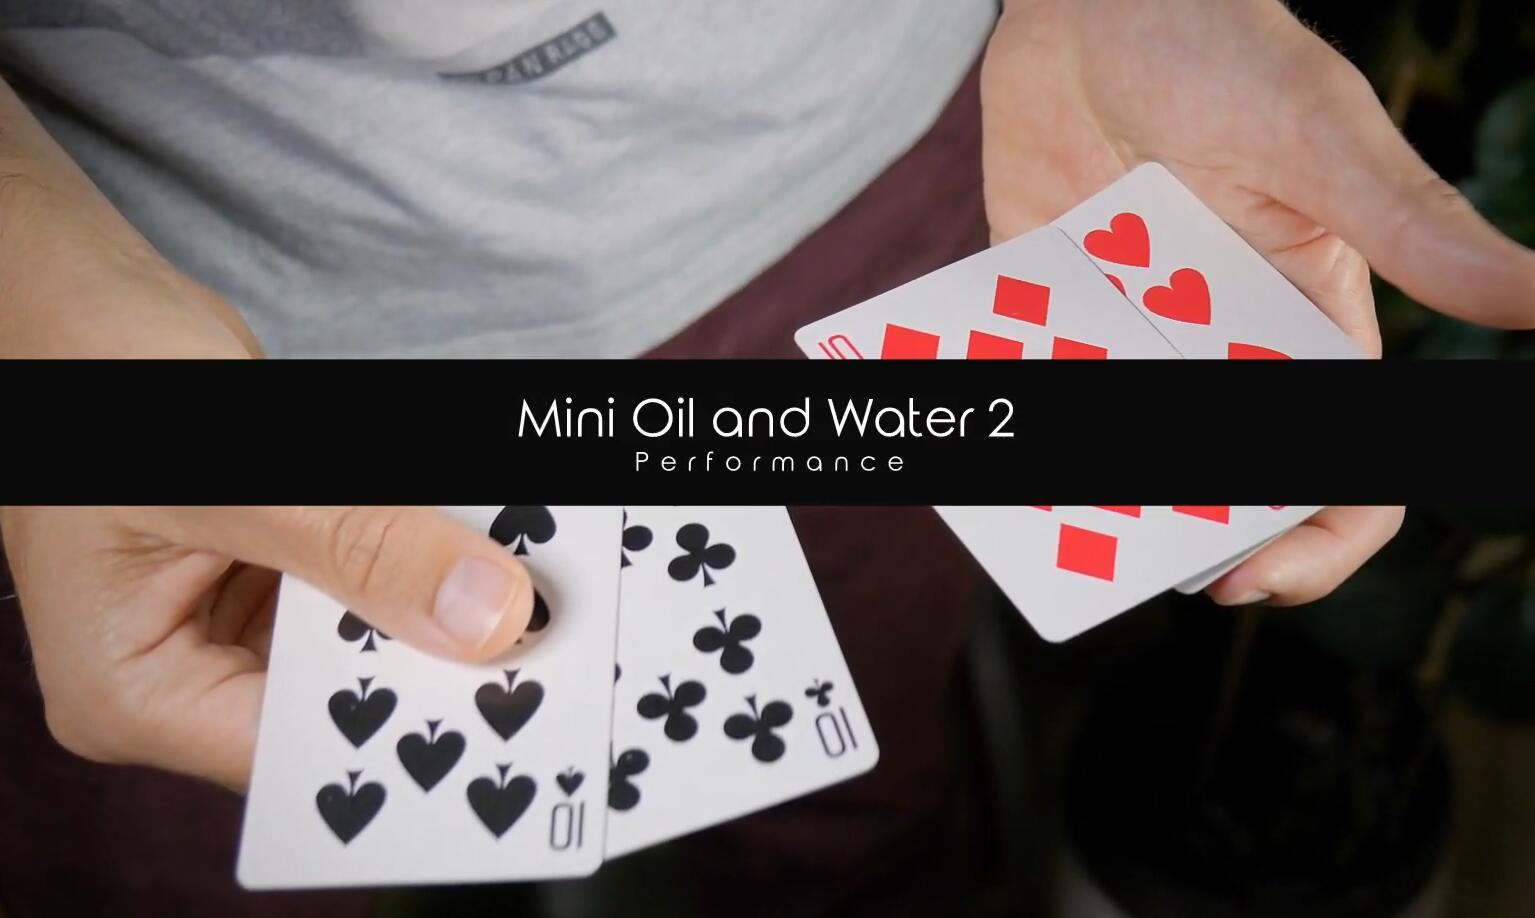 Mini Oil and Water 2 by Yoann Fontyn (Mp4 Video Download 720p High Quality)